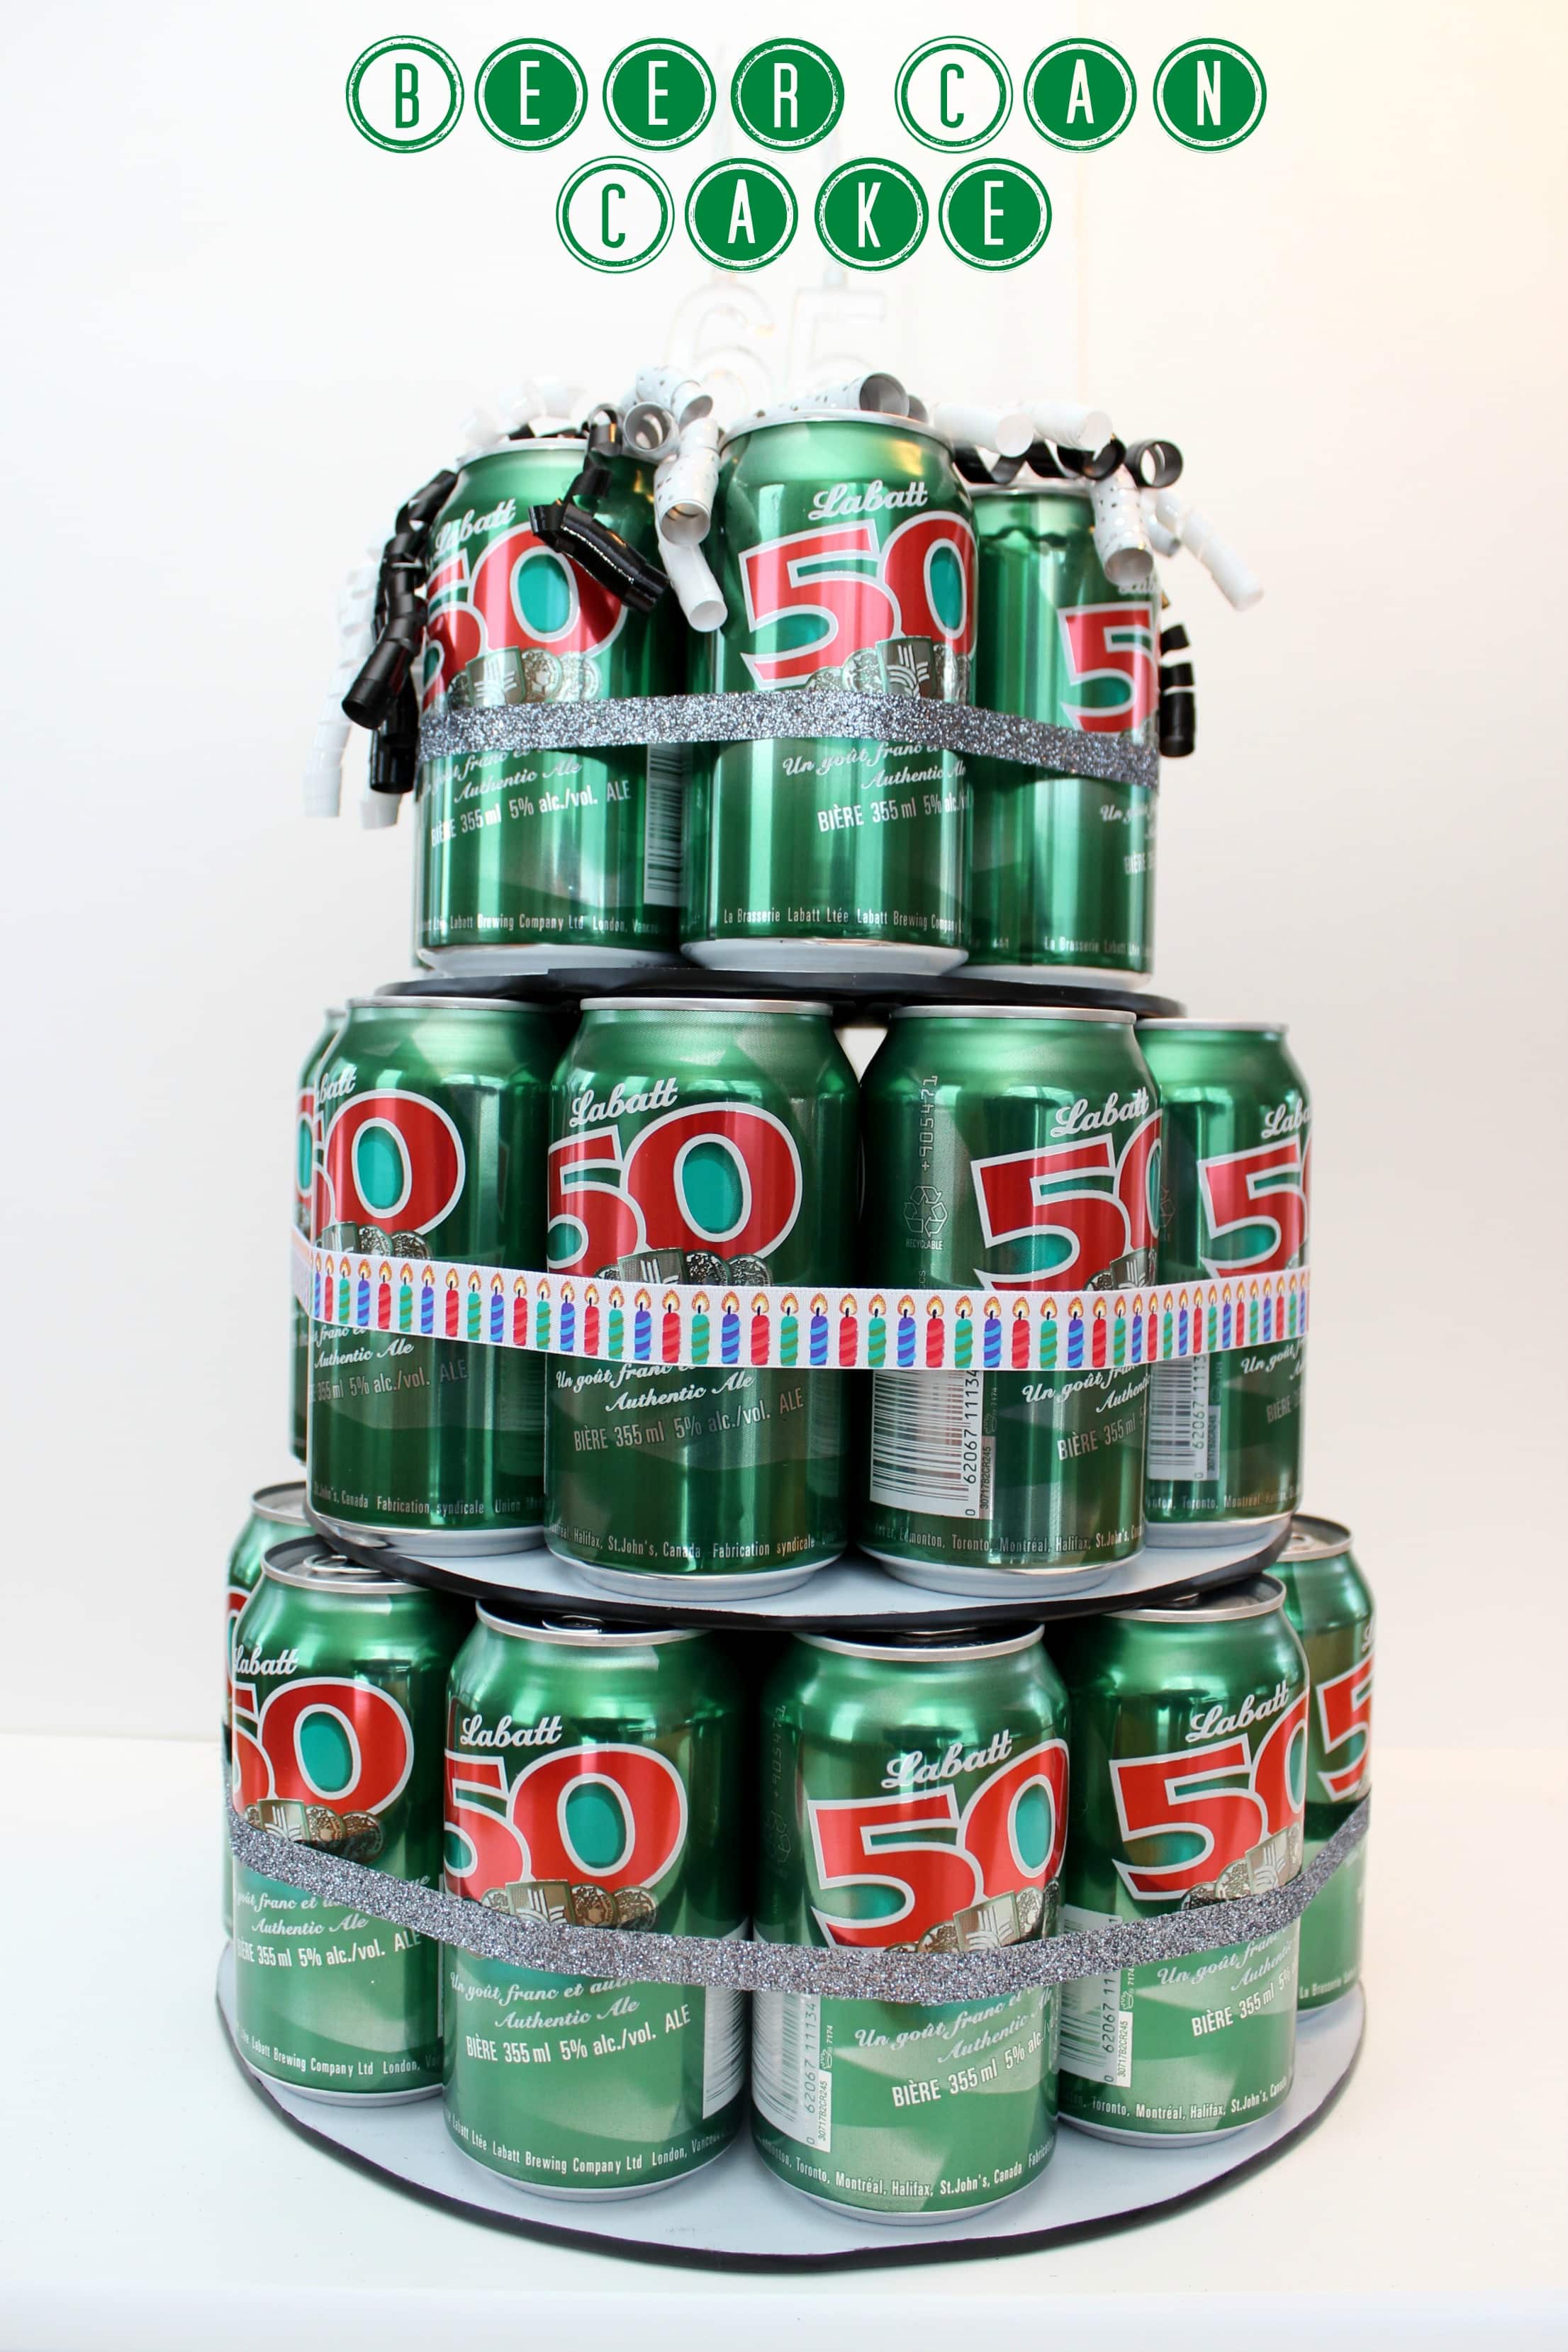 How to Make a Beer Can Cake - Mom vs the Boys